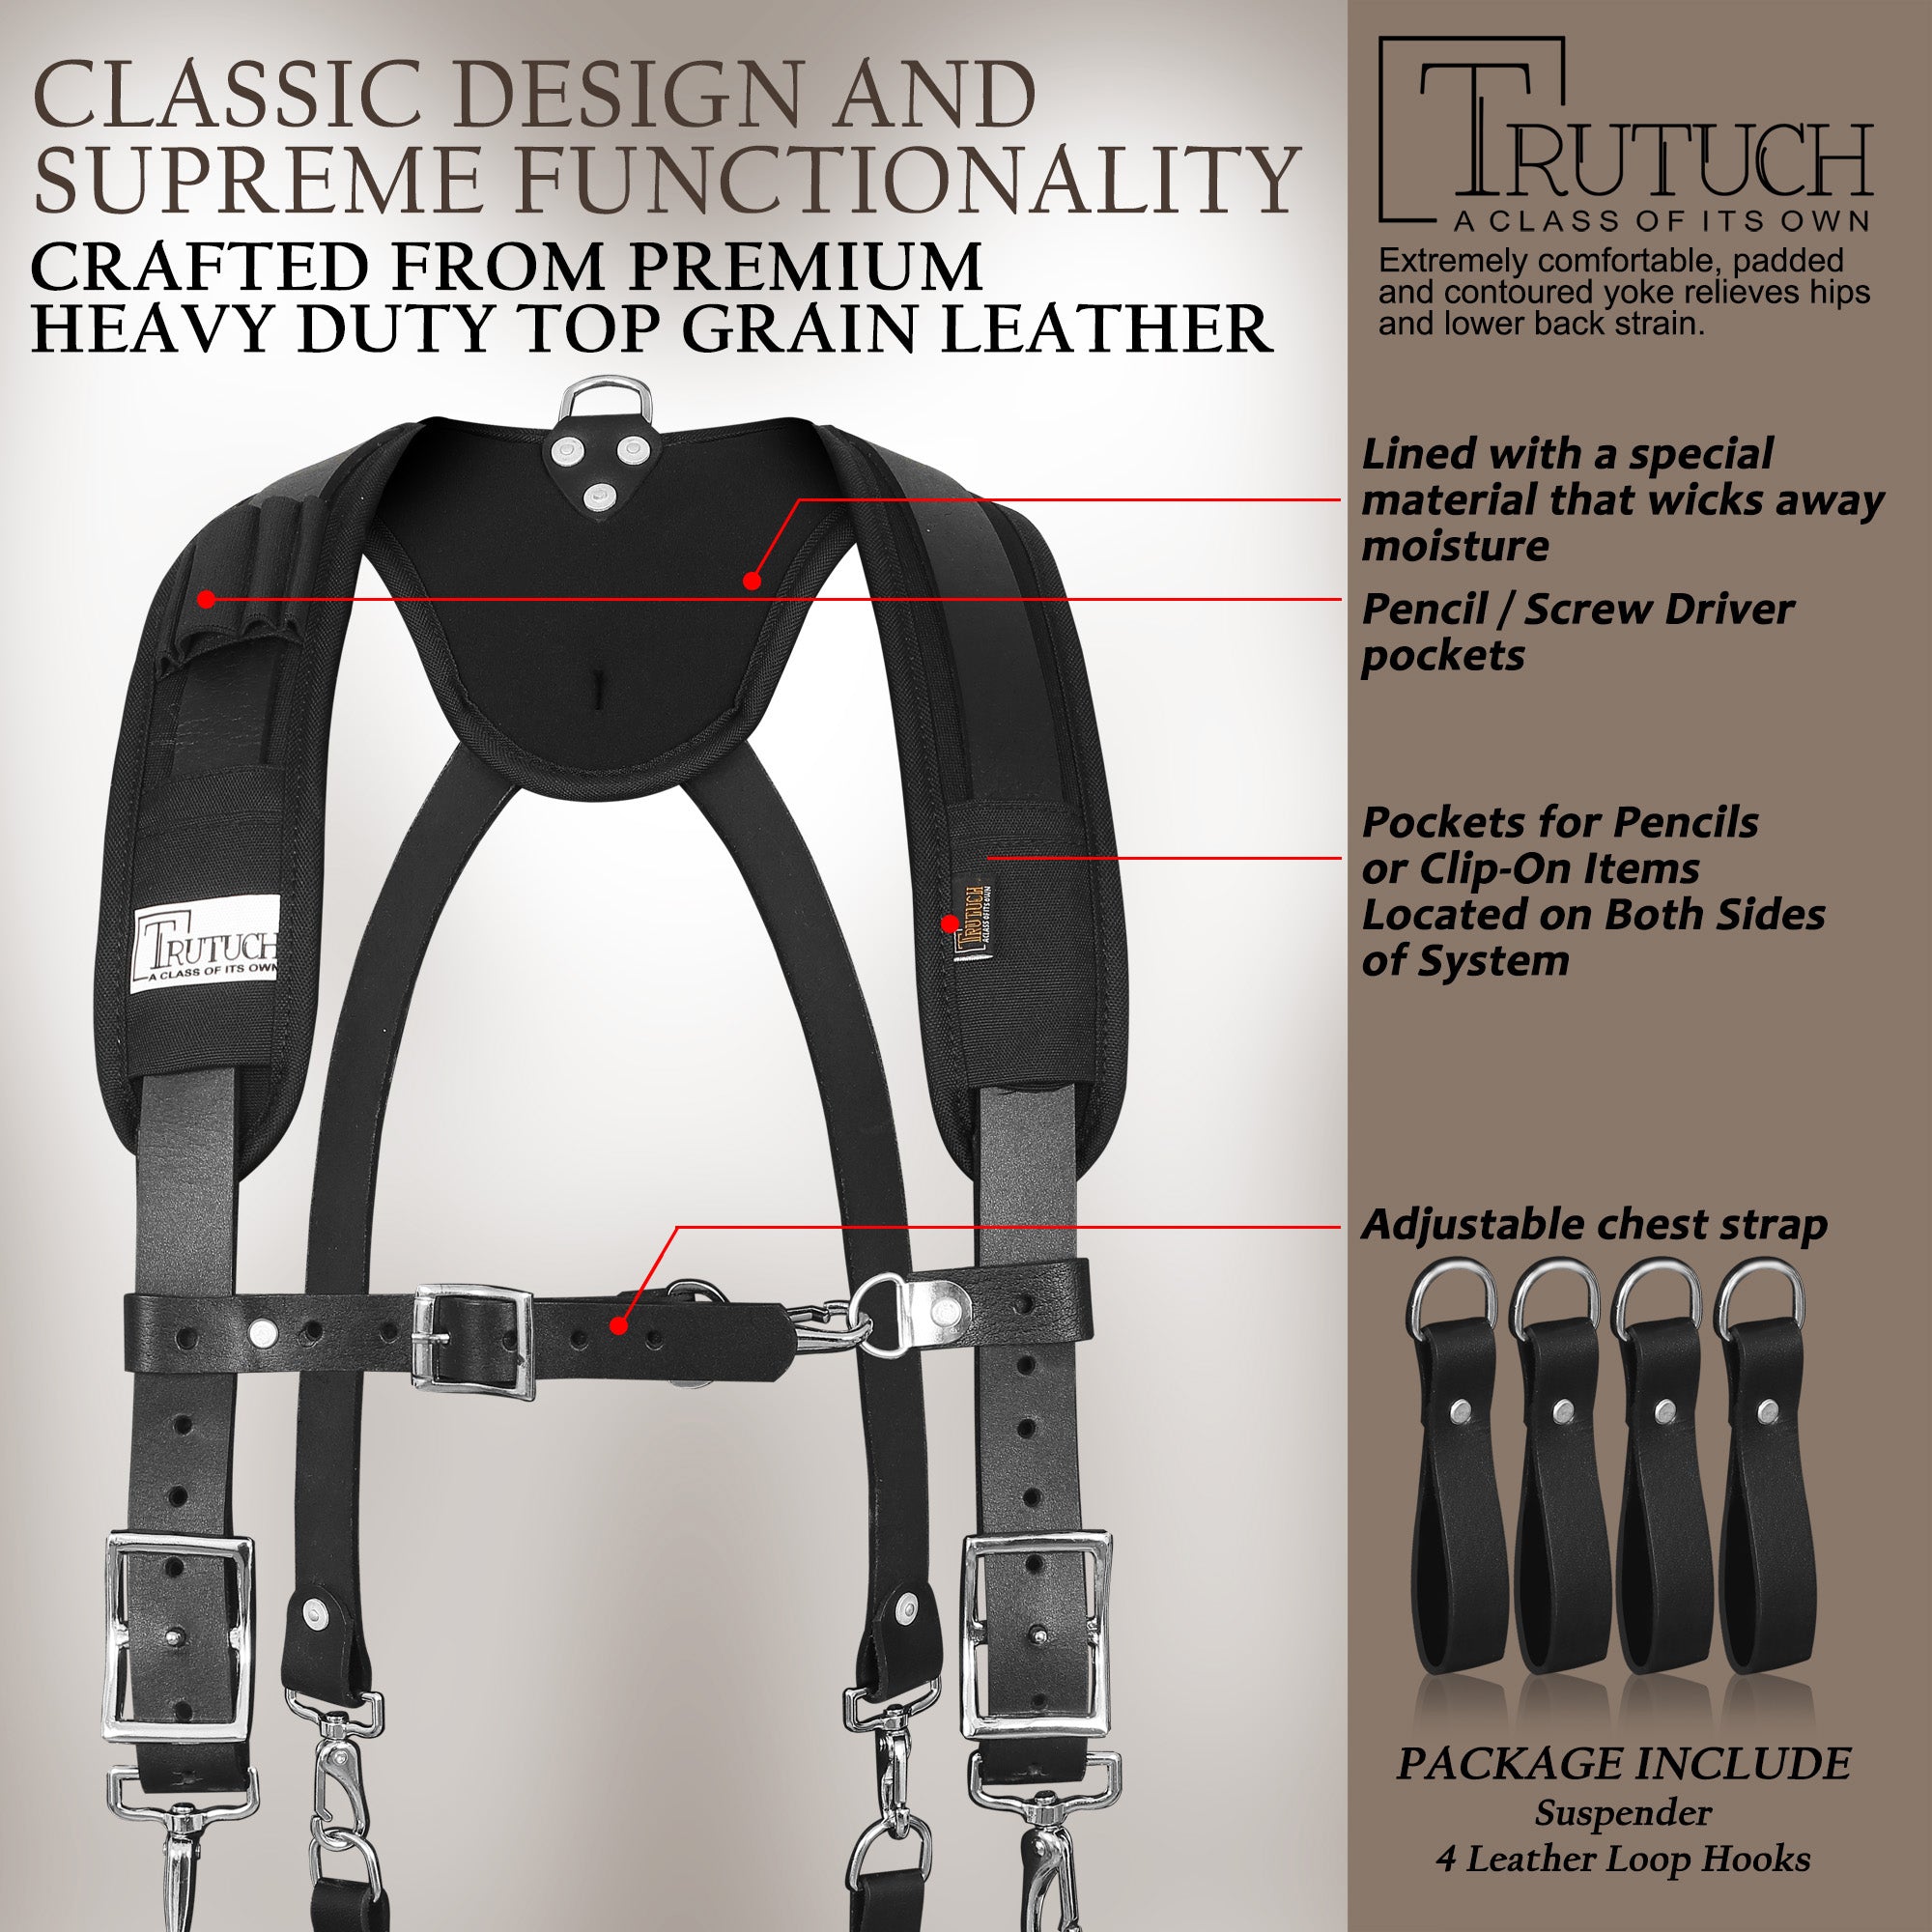 Trutuch Green Nylon & Leather Tool Belt with Leather Work Suspender, Framers Tool Belt, Electrician, Construction, Drywall Tool Belt, TT-1530-R-7030-S